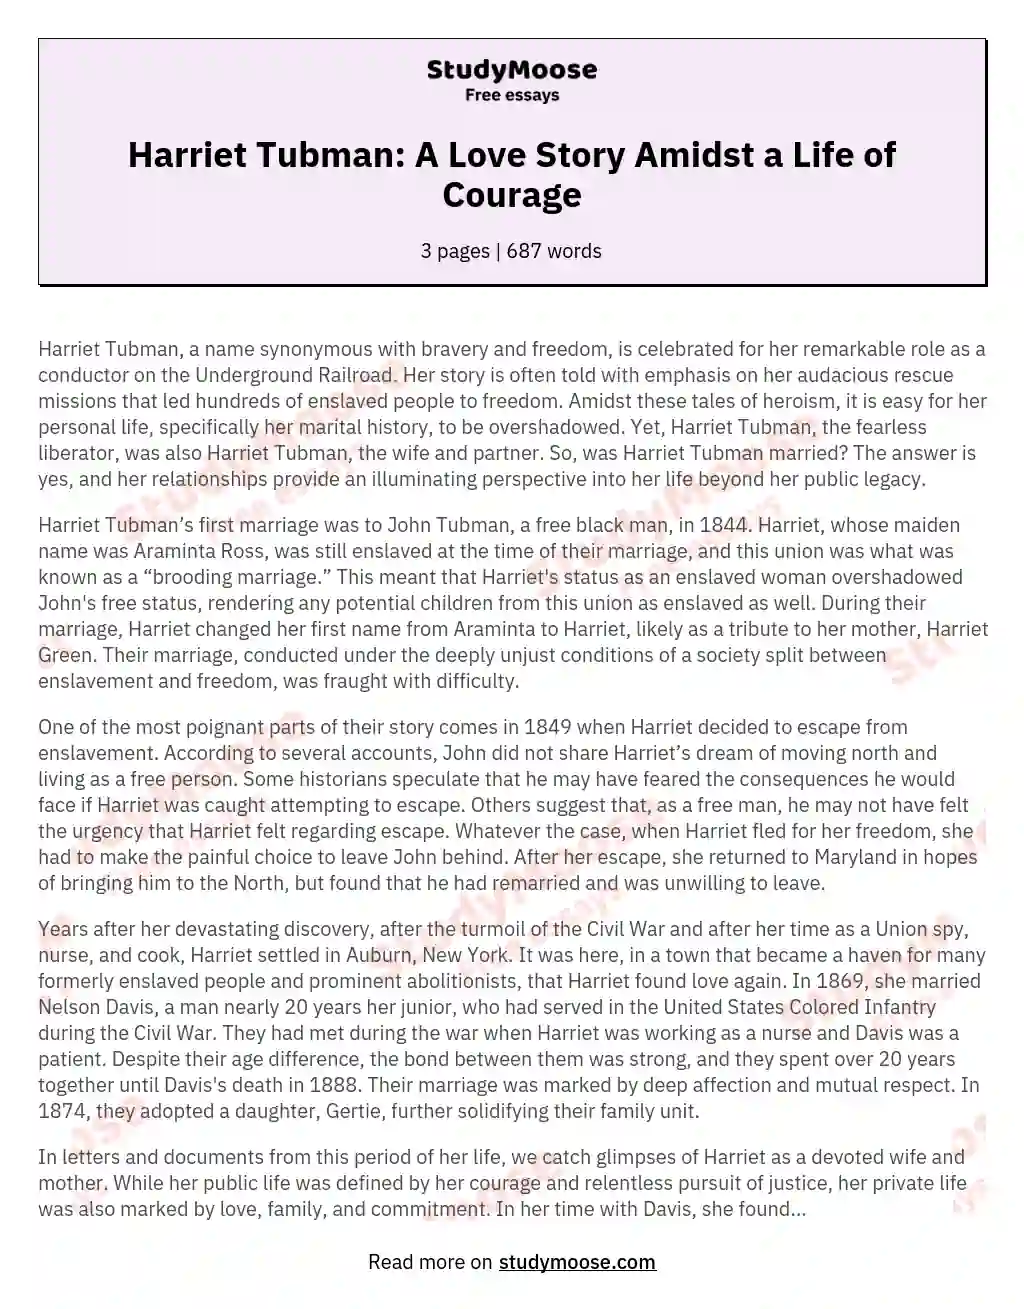 Harriet Tubman: A Love Story Amidst a Life of Courage essay